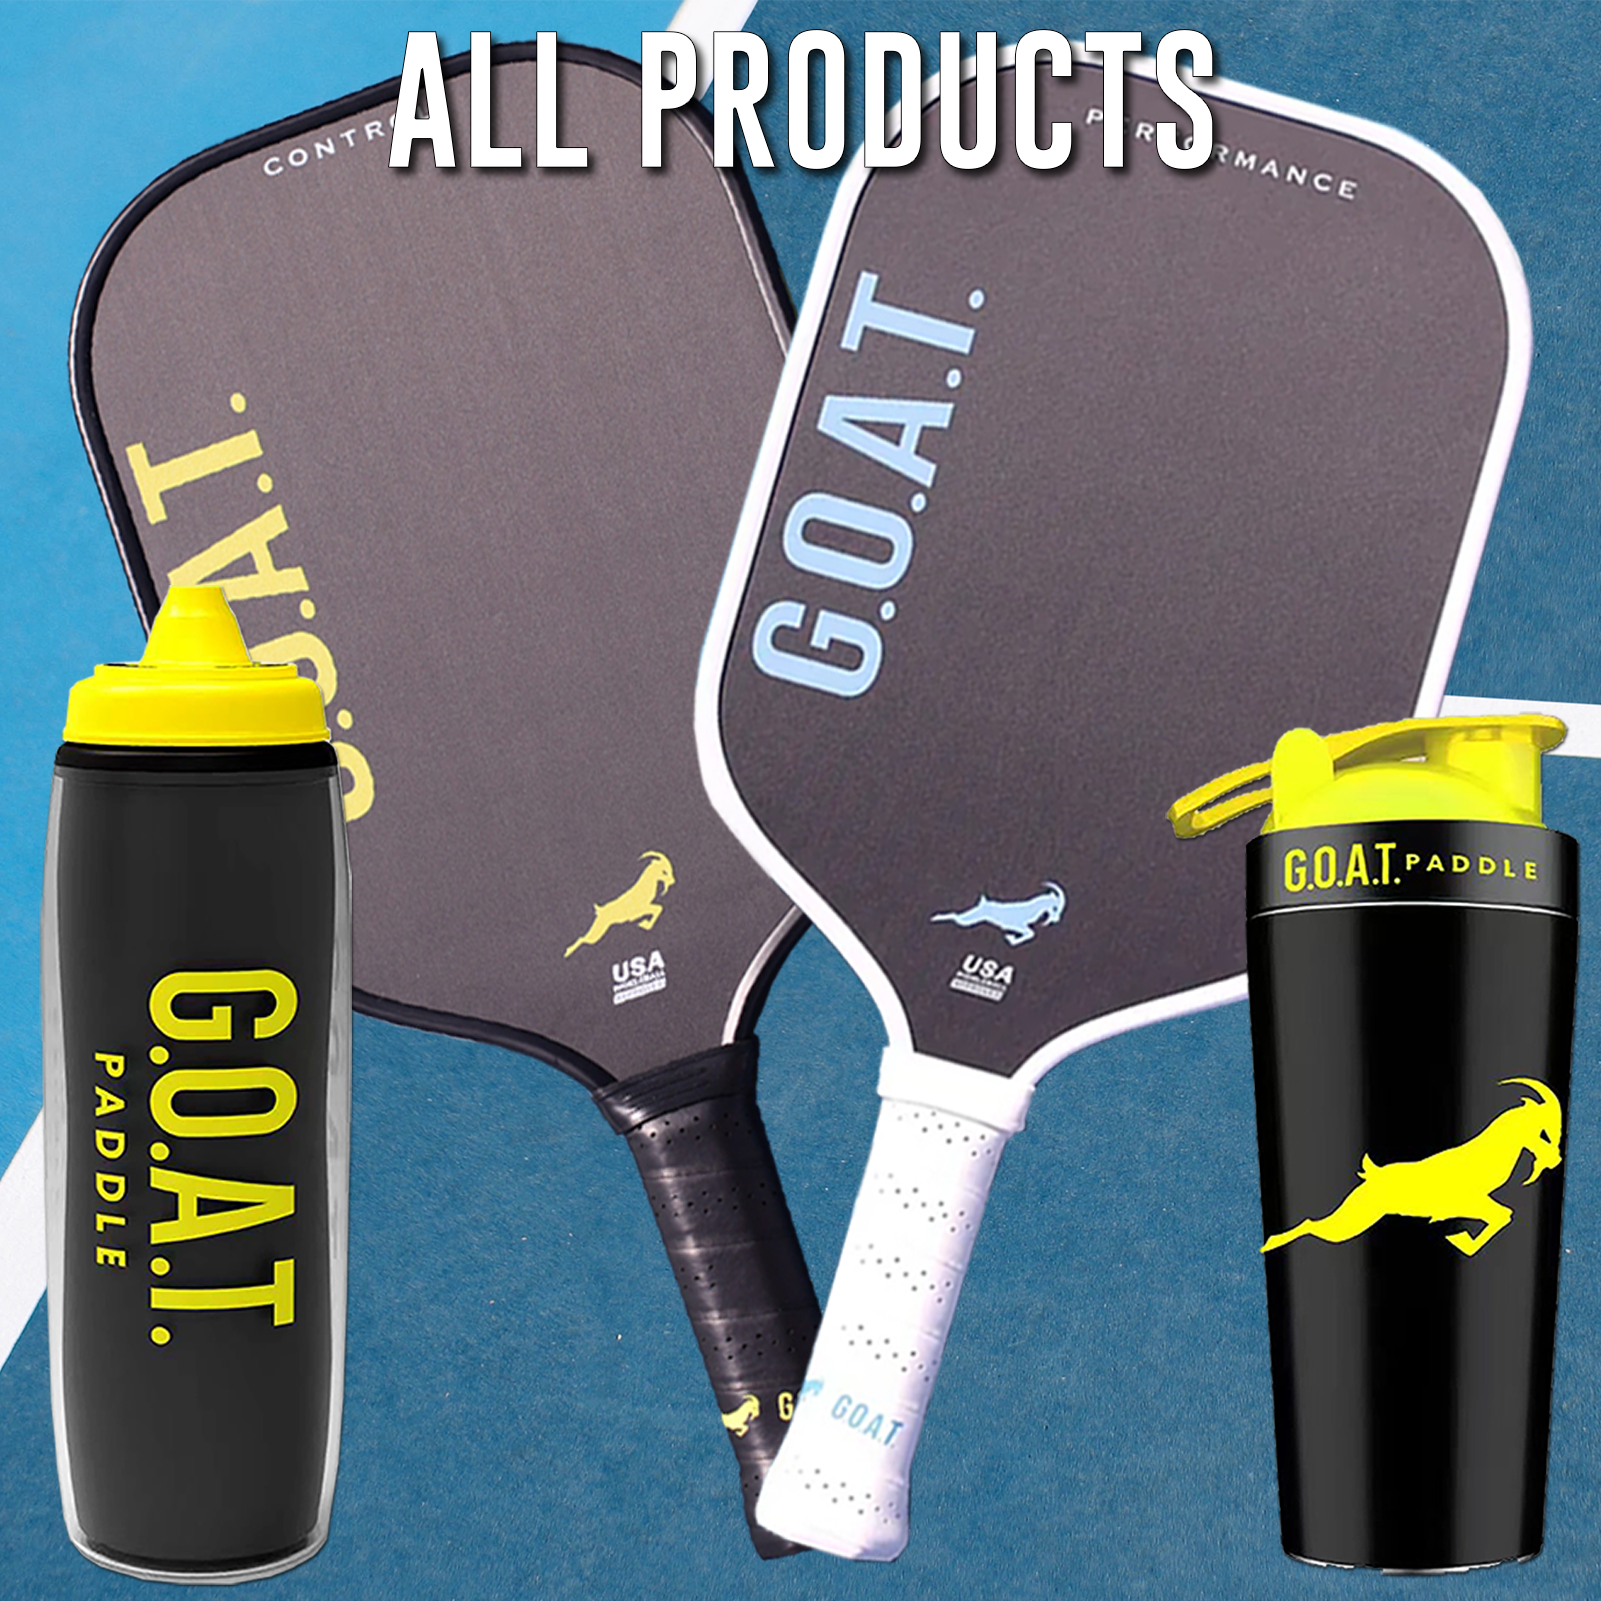 Category image for all products Black and Yellow GOAT Control Paddle and BLUE and white GOAT Performance Paddle with GOAT logo and name along, GOAT logo water squirt bottle, GOAT logo shaker tumbler